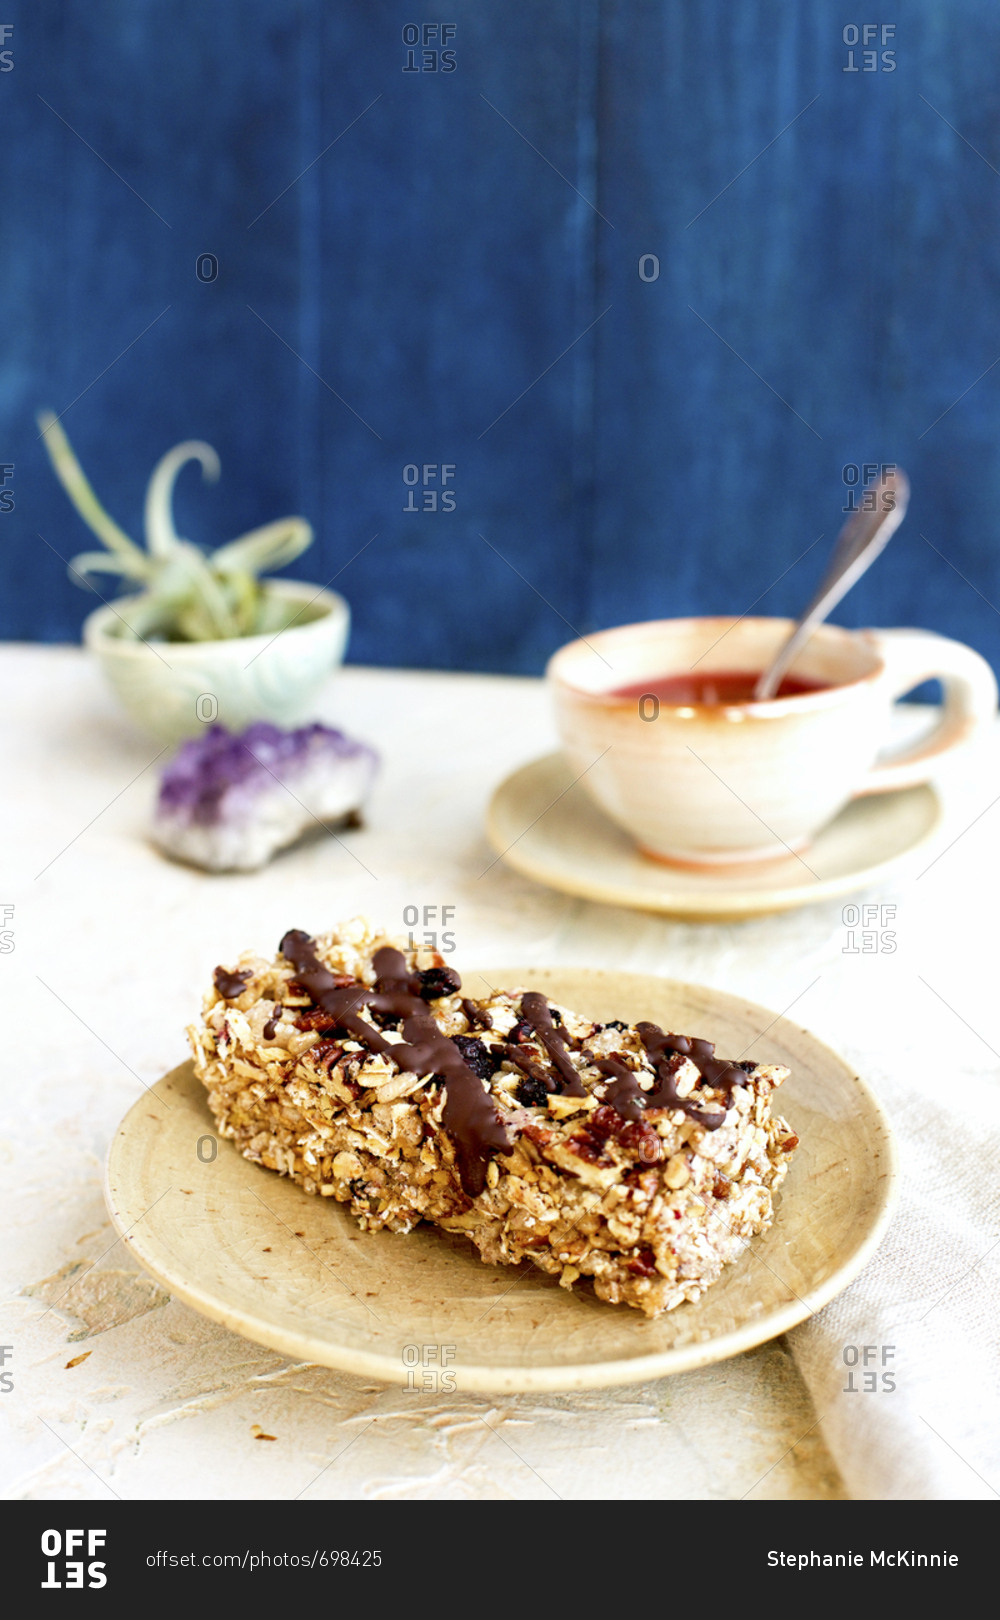 Blueberry caramelized pecan breakfast bar drizzled with dark chocolate served with a cup of tea